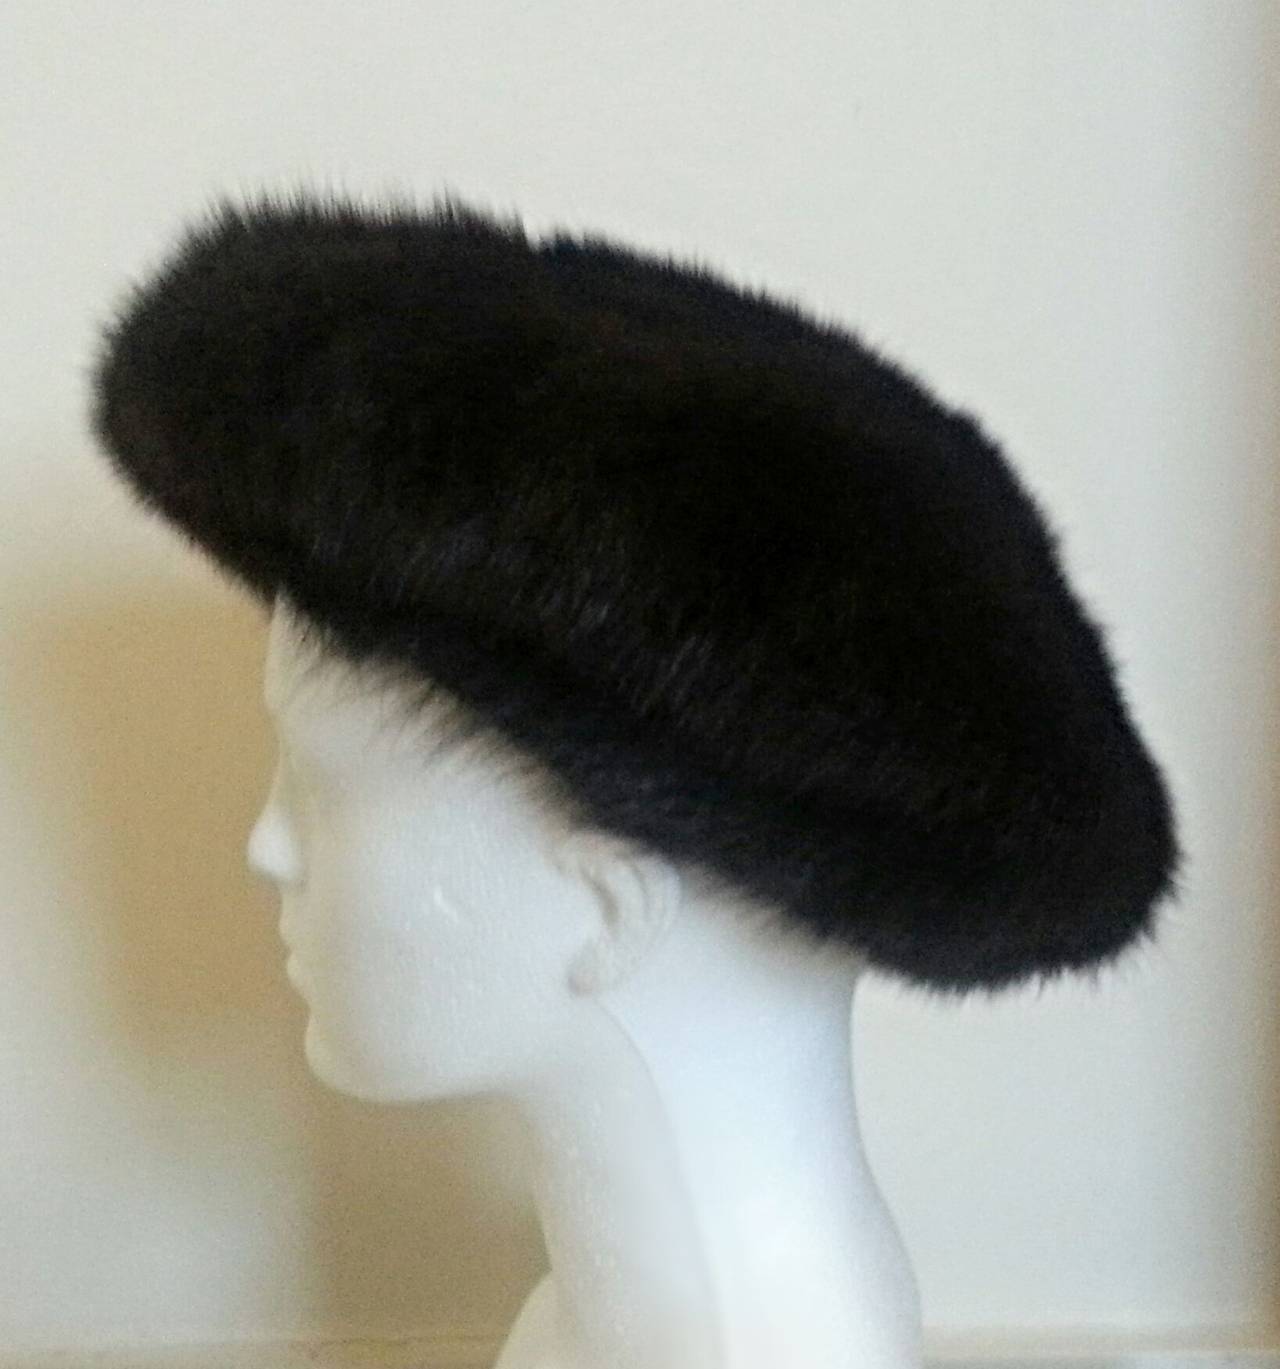 Women's Wonderful and Rare 1980s Chanel Mink Beret Hat with detachable Satin Bow